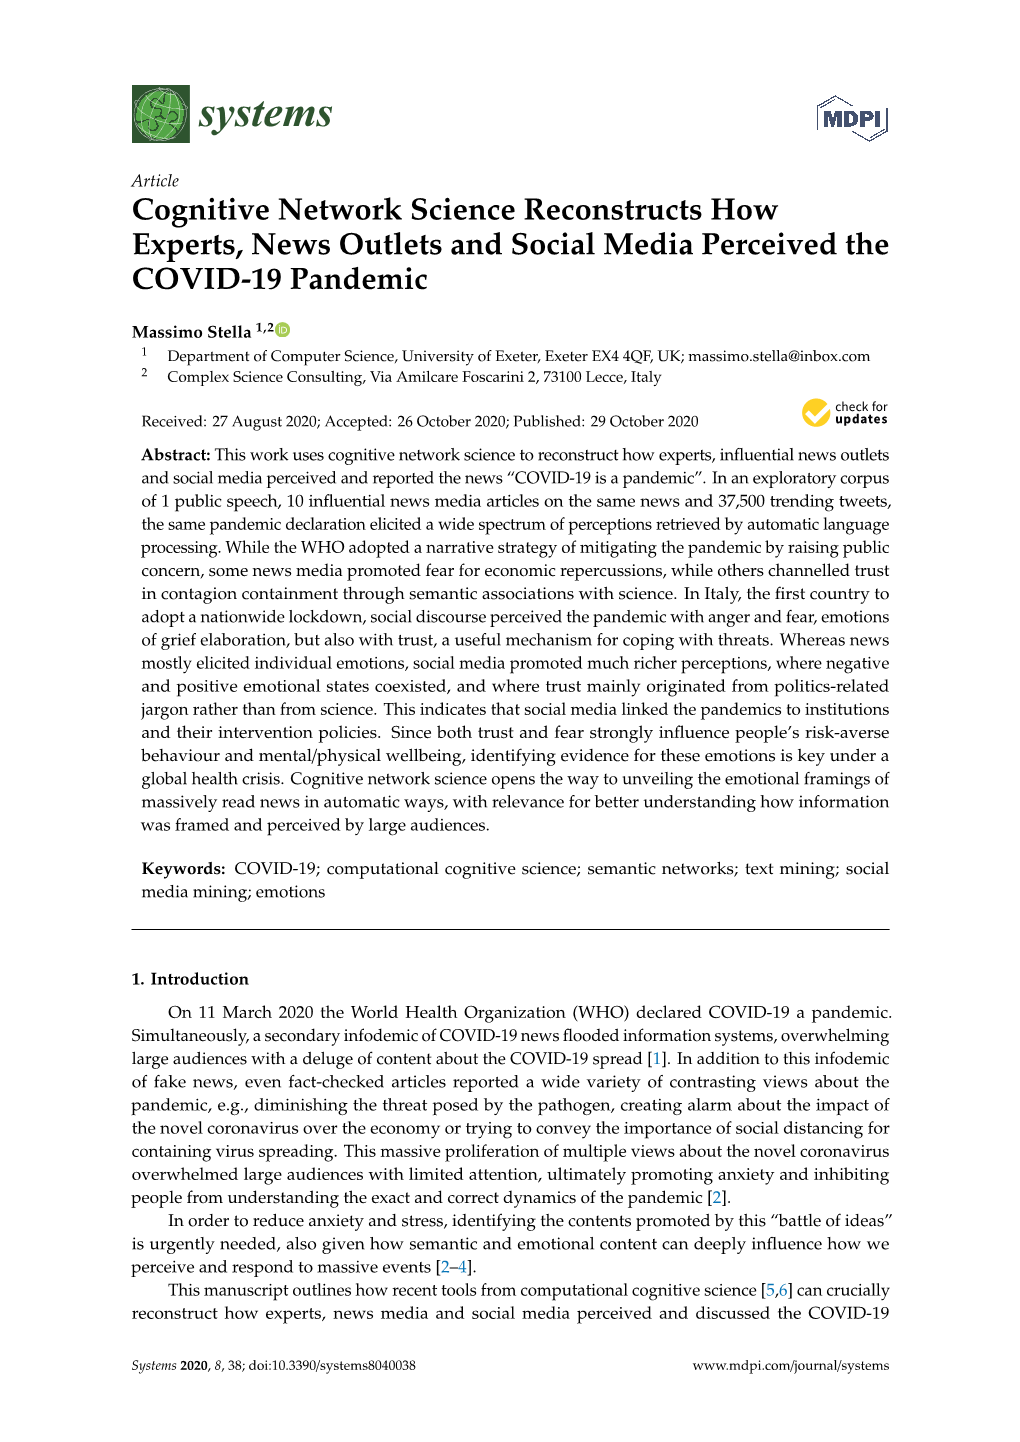 Cognitive Network Science Reconstructs How Experts, News Outlets and Social Media Perceived the COVID-19 Pandemic